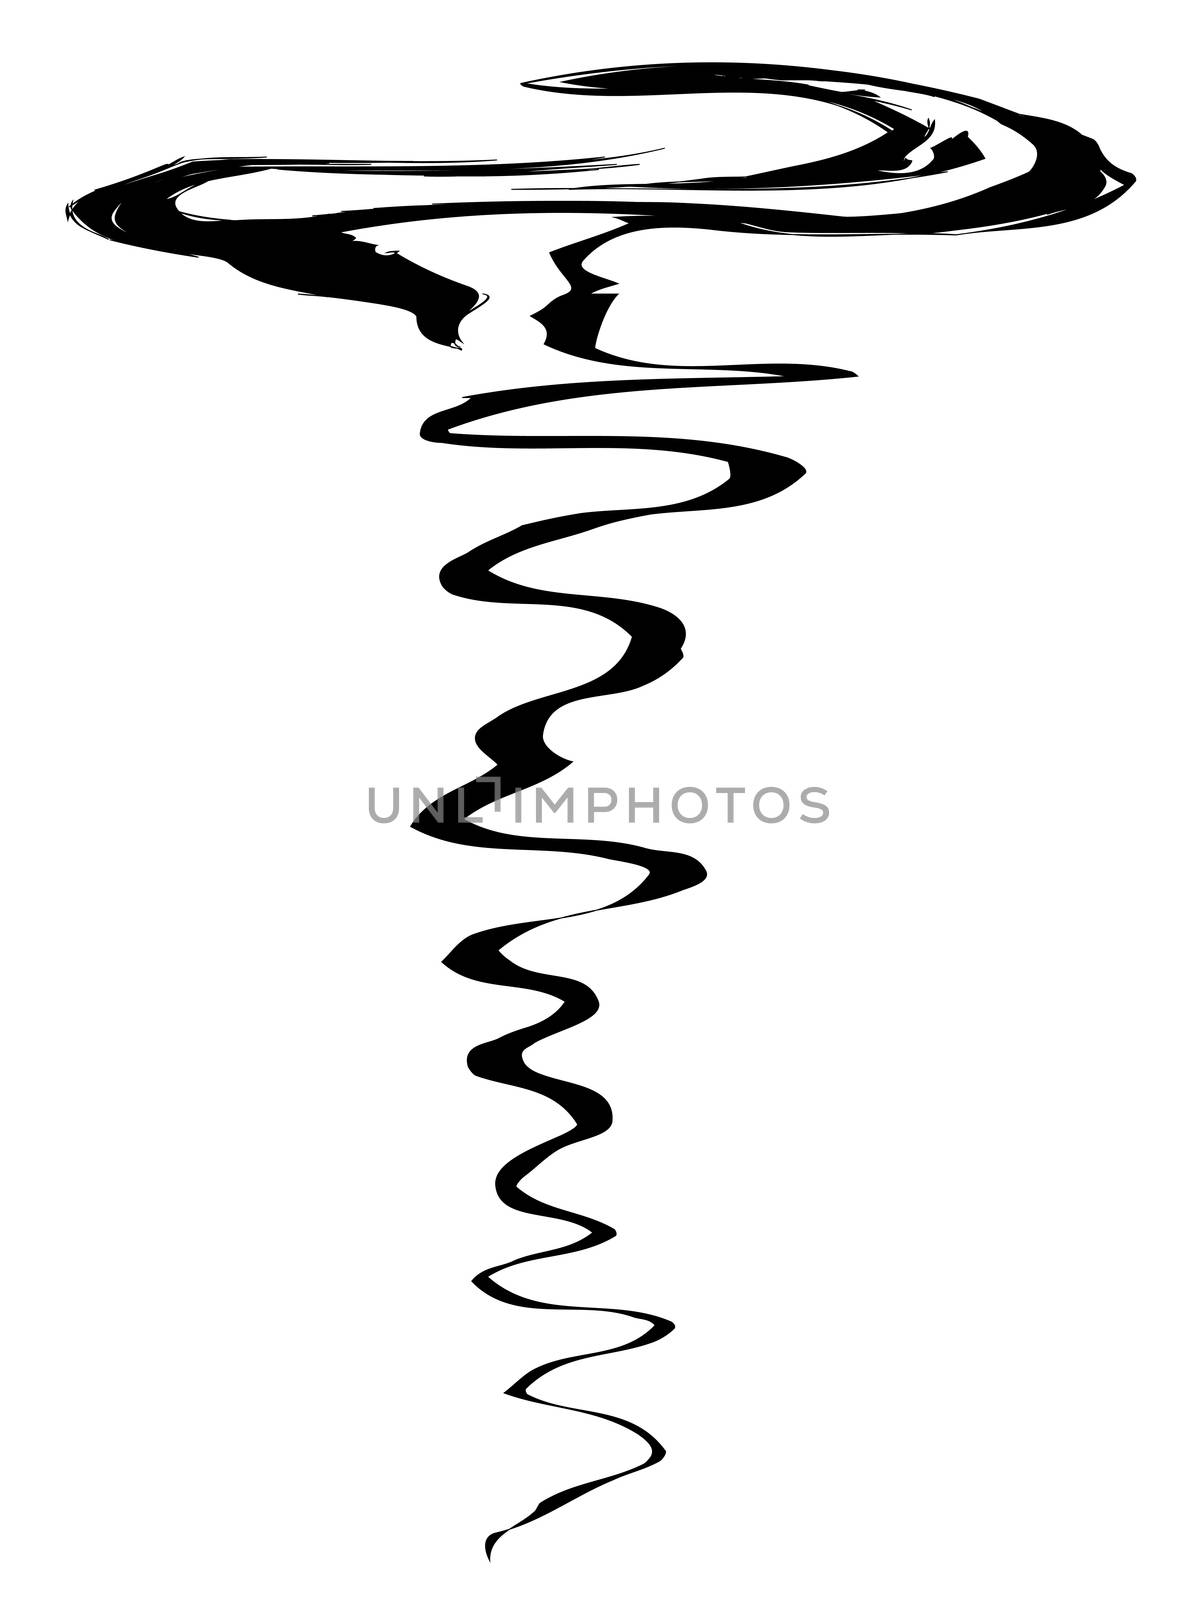 An isolated and abstract hurricane image over a white background